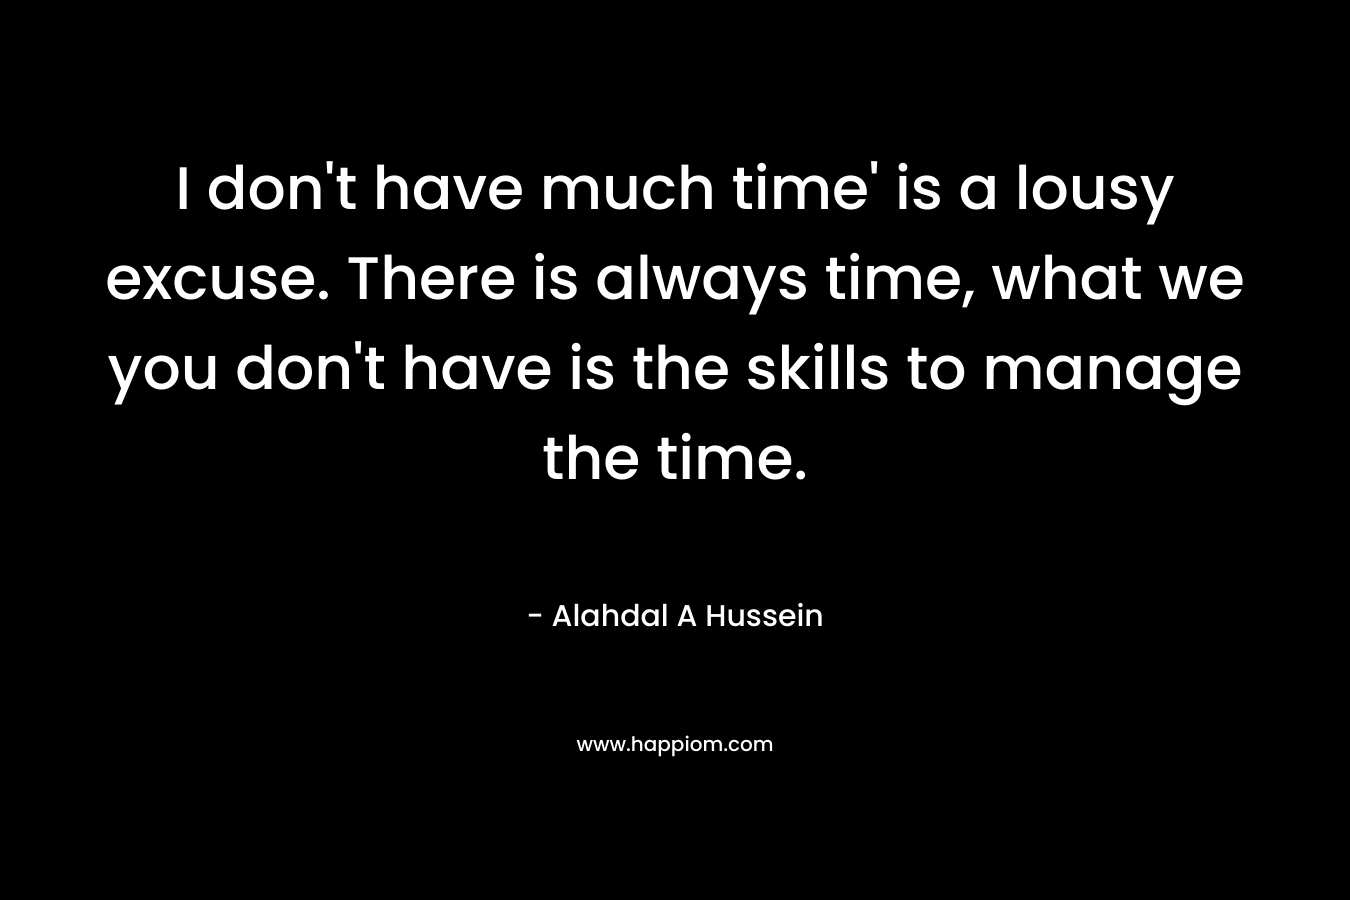 I don't have much time' is a lousy excuse. There is always time, what we you don't have is the skills to manage the time.